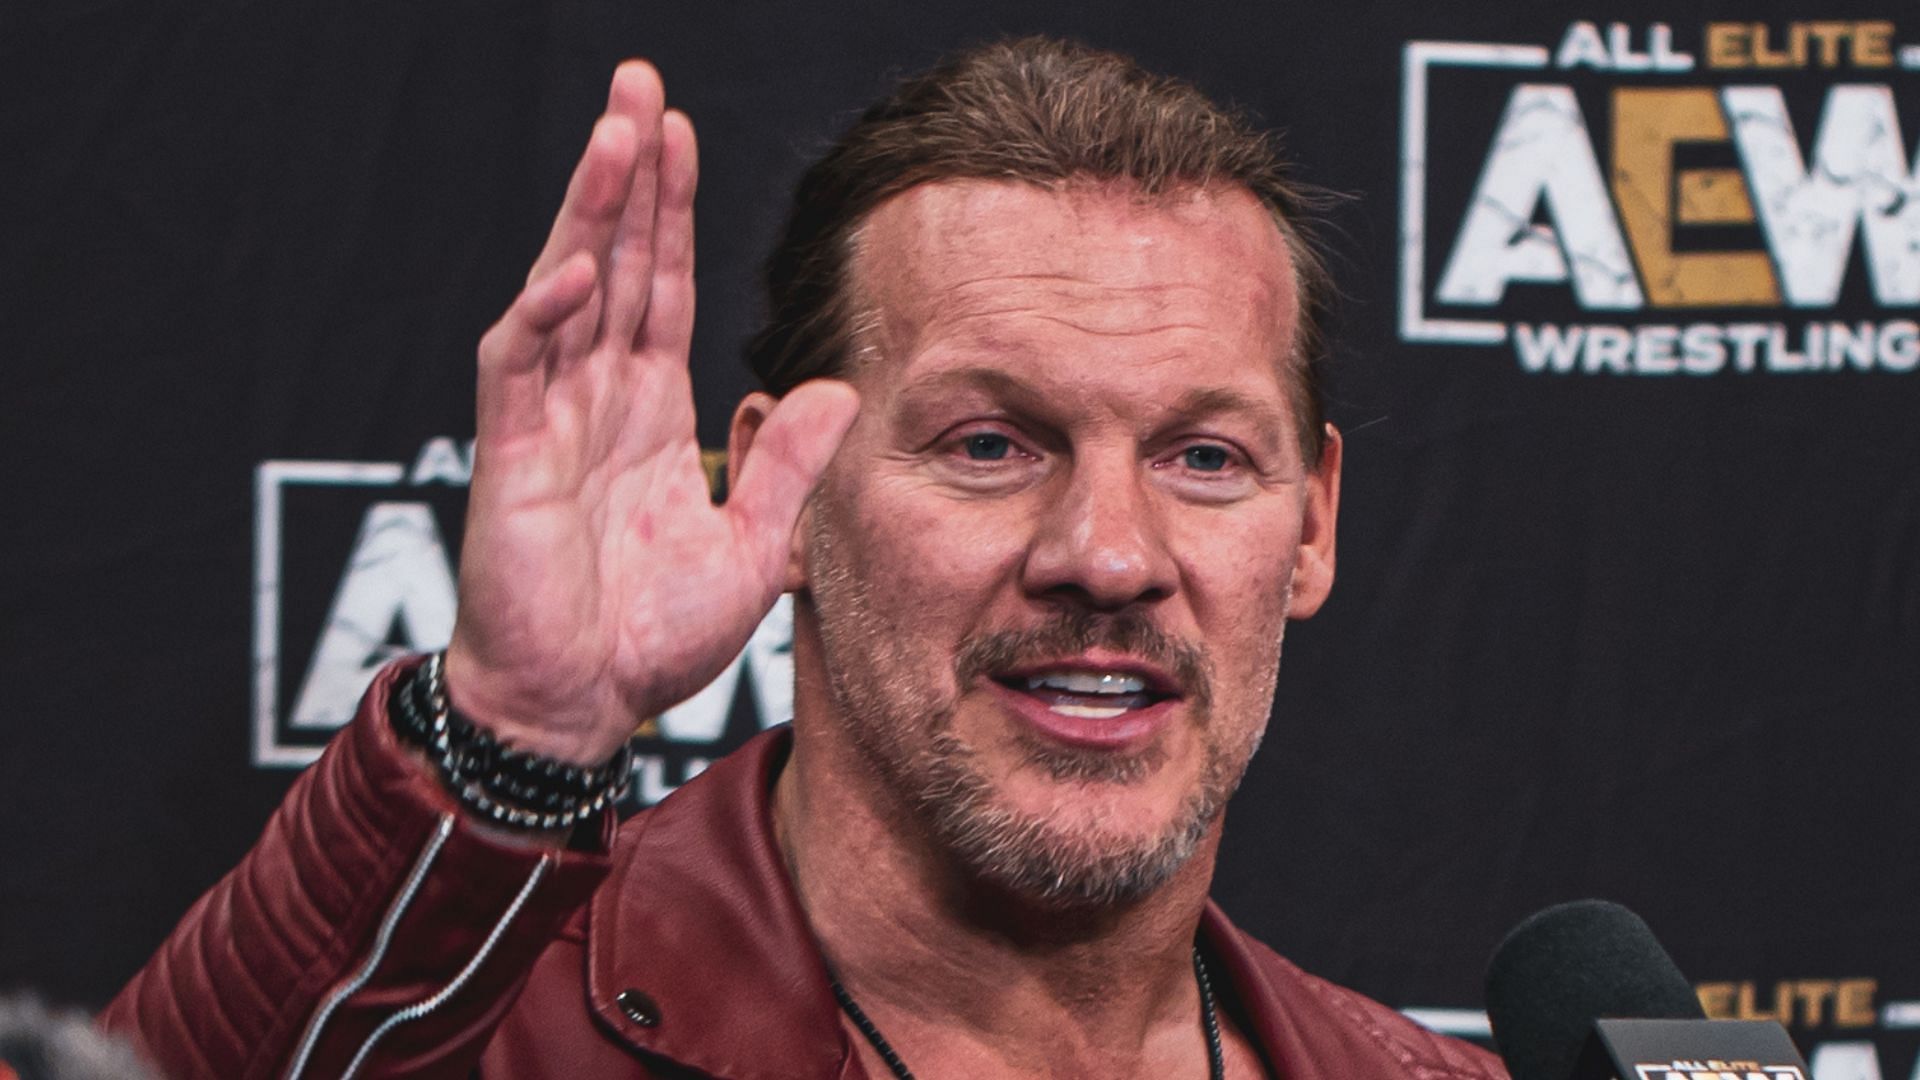 Chris Jericho at the AEW Double or Nothing 2022 media scrum (credit: Jay Lee Photography)